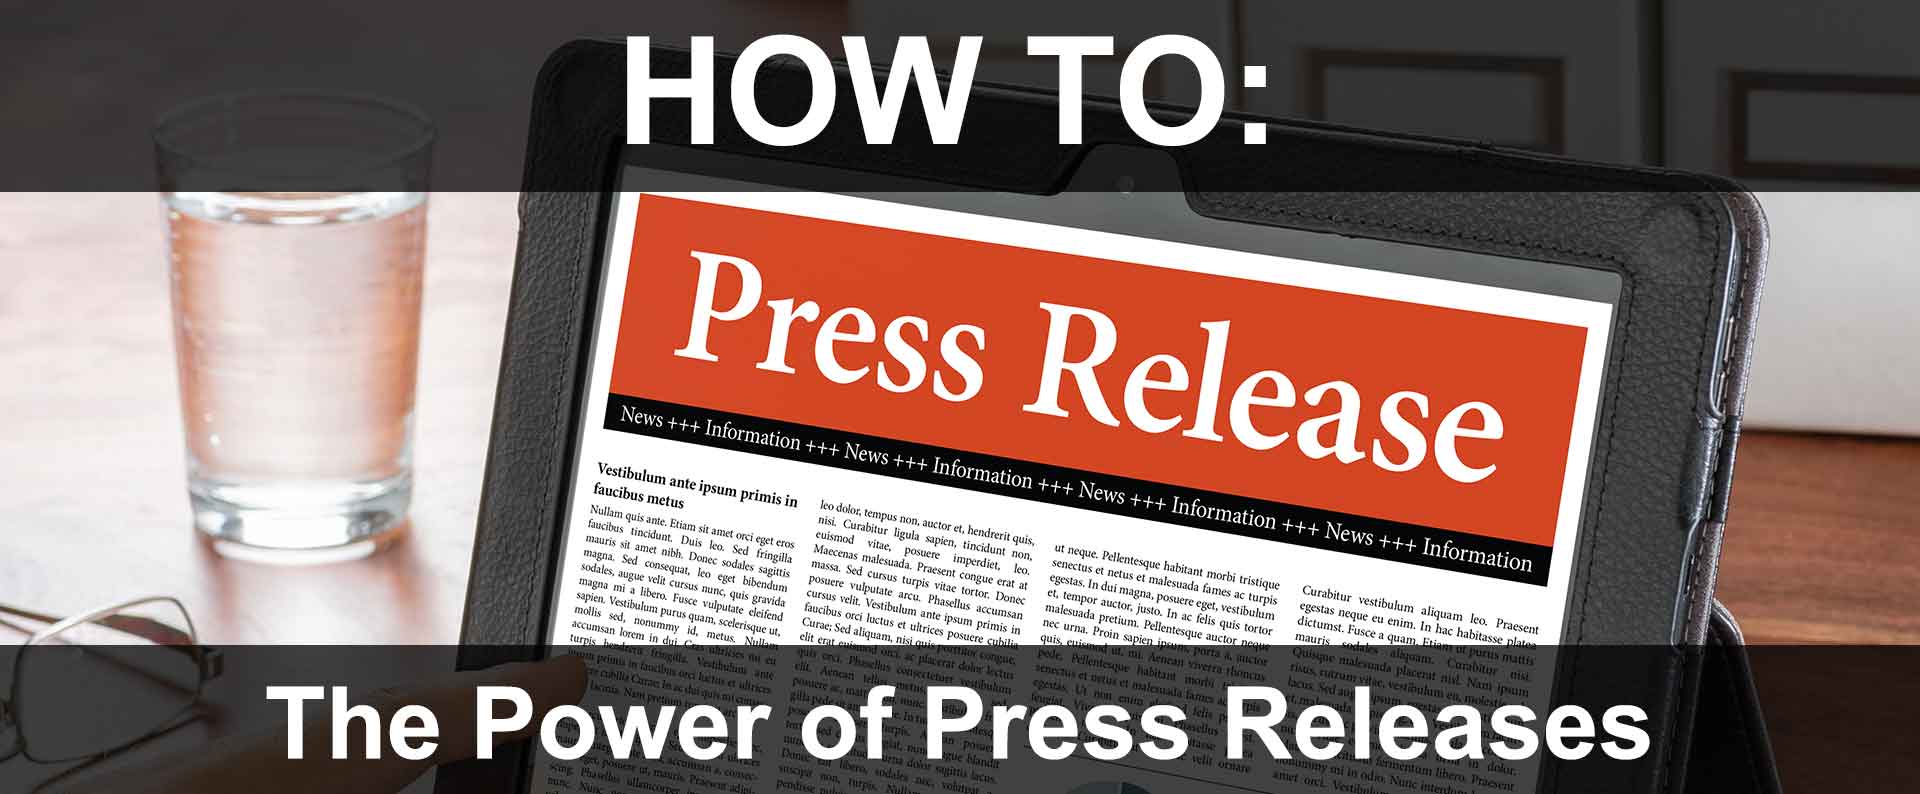 Using Press Releases to Increase Market Awareness & Search Engine Ranking